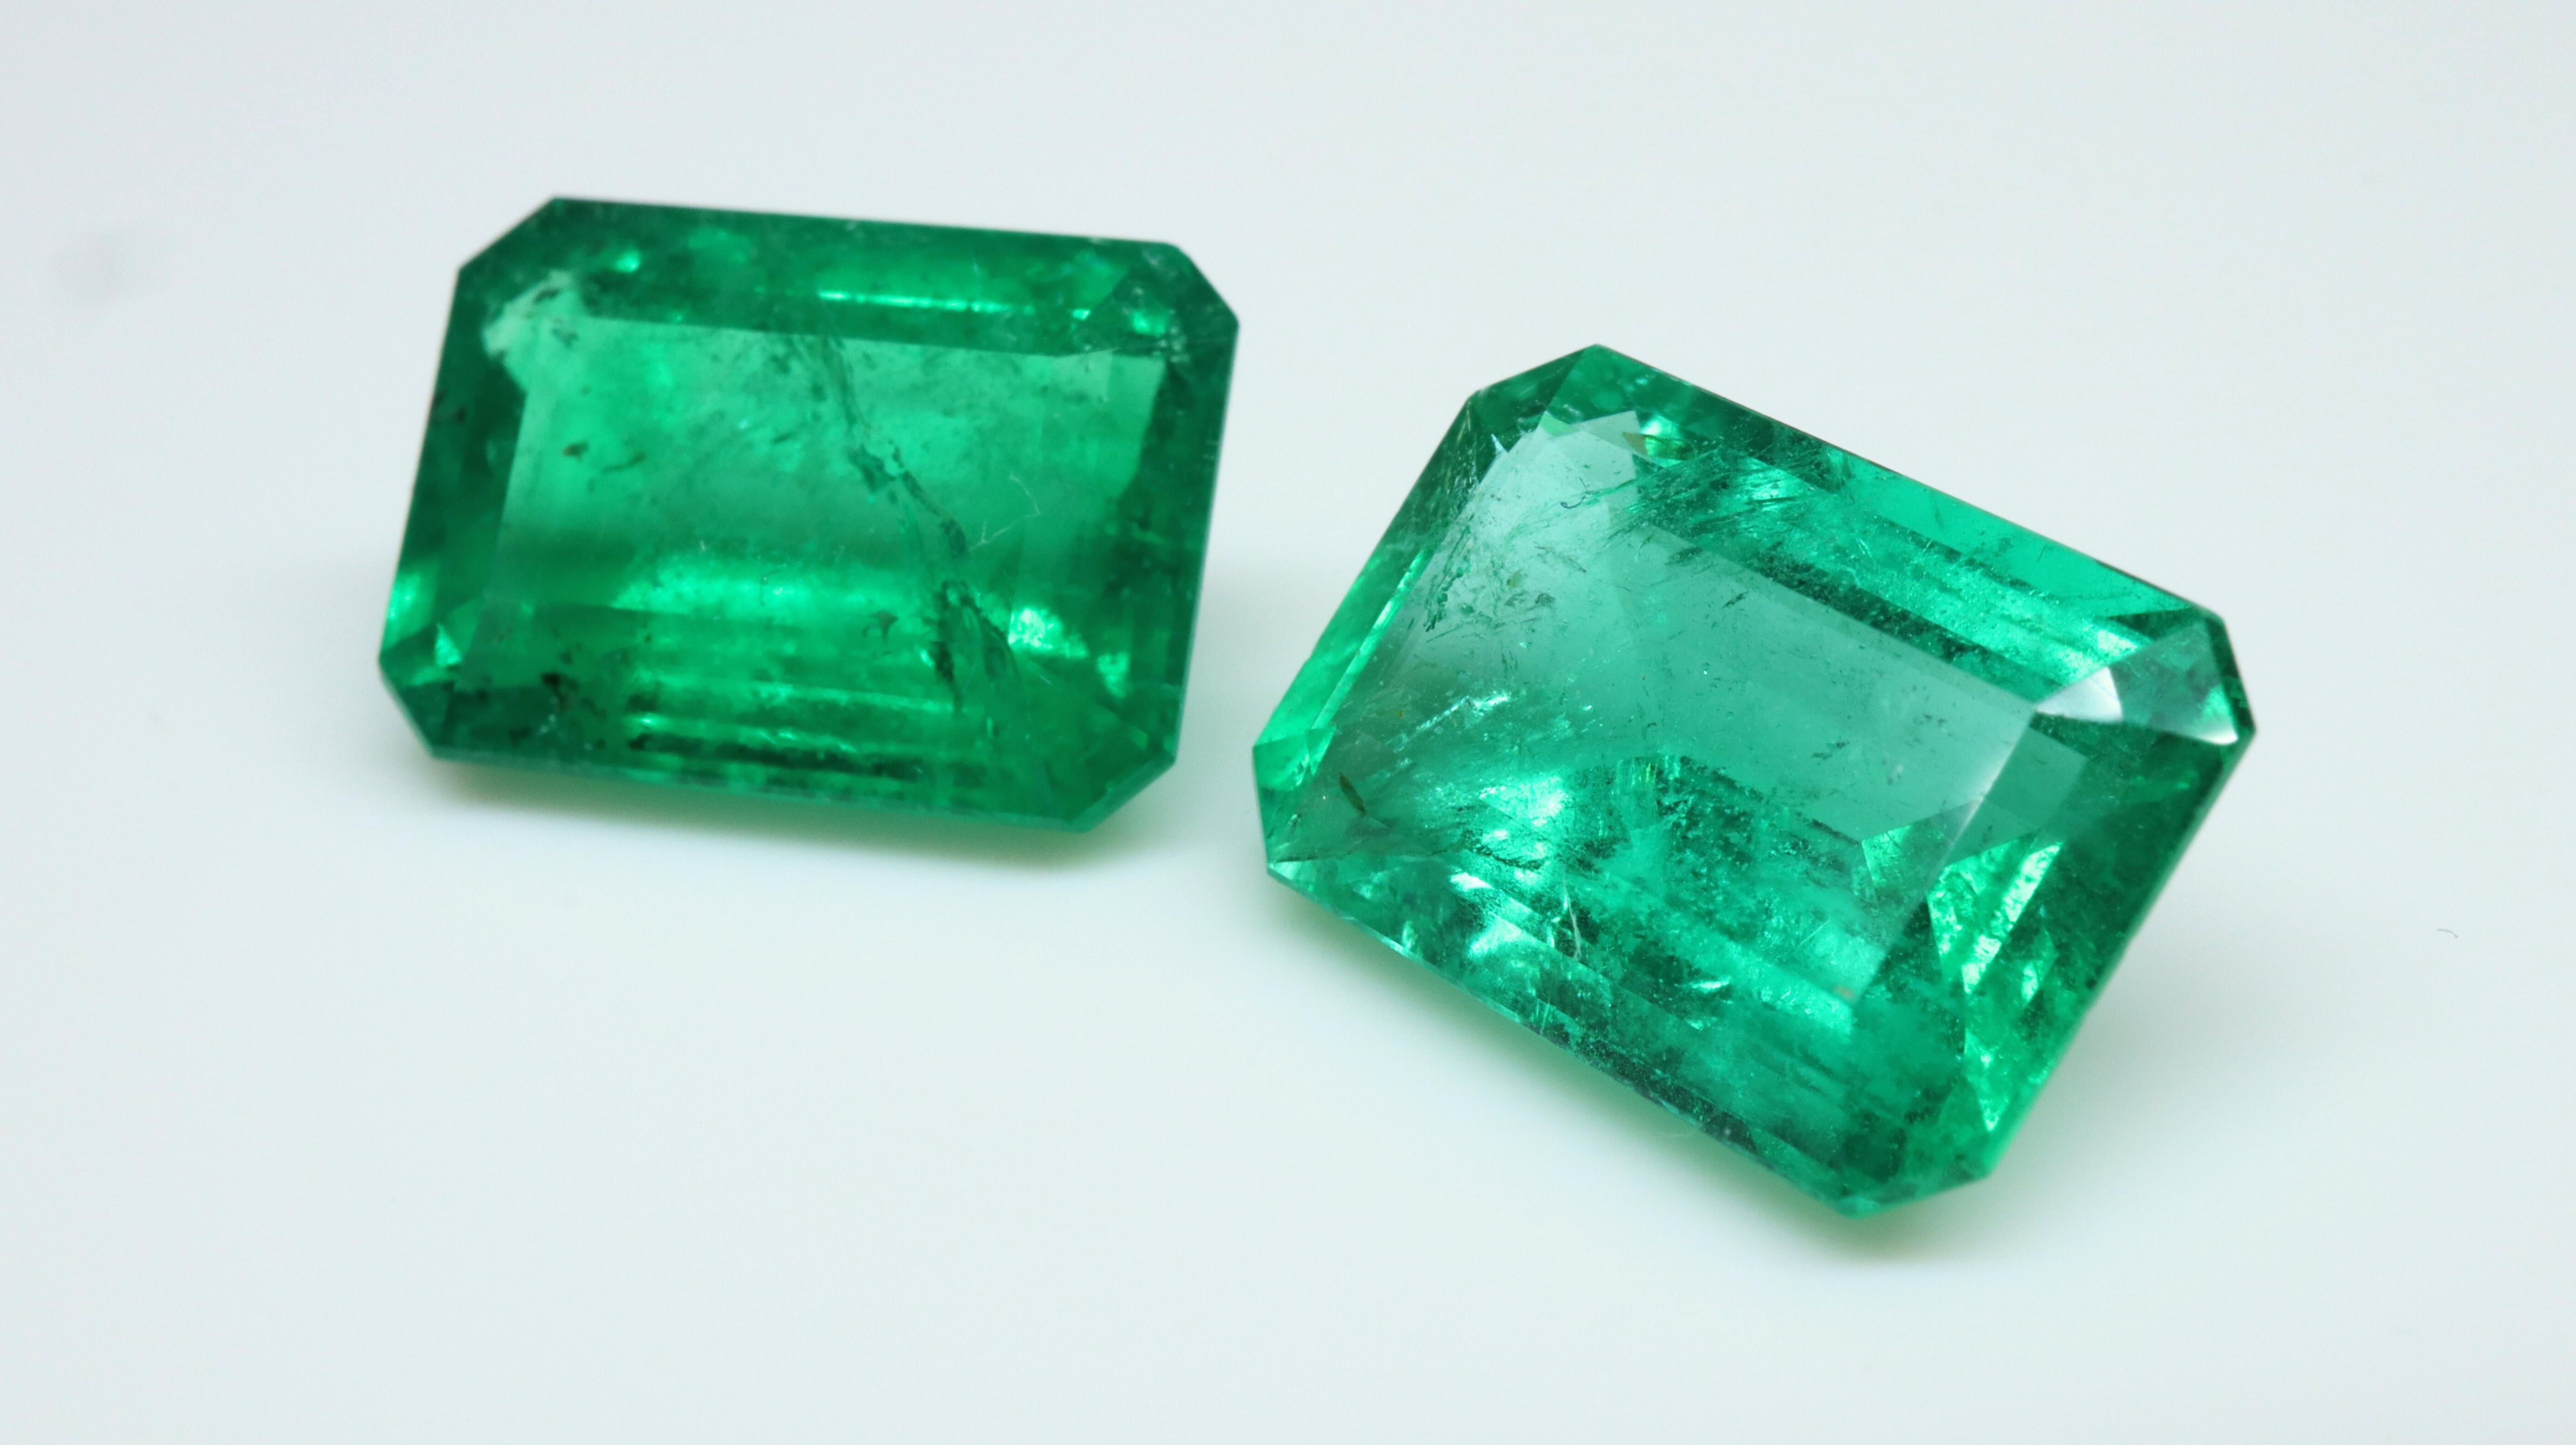 A beautiful set of two Emerald with excellent color, crystal, and saturation.

Details and description:
Dimensions: 9.53x6.87x4.29 // 9.70x6.90x4.41mm
Weight: 4.22ct
Color:  Intense to Vivid Green 
Treatment: Oil

Emeralds are naturally porous and